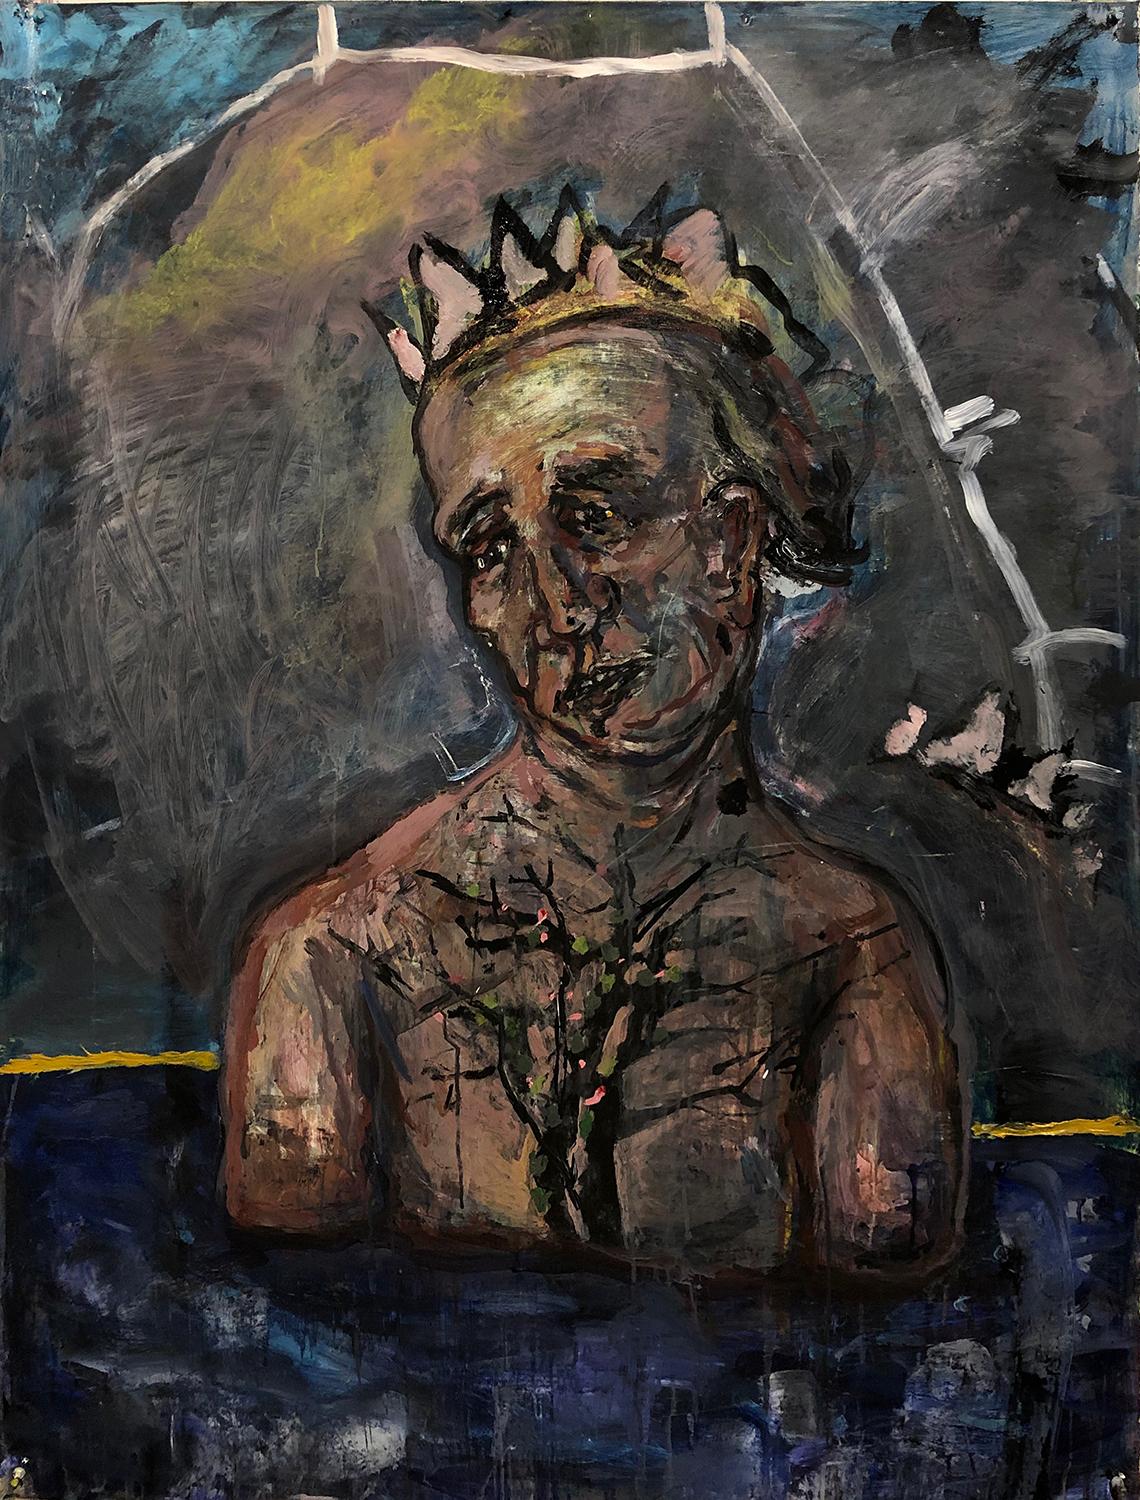 "Man Wearing Crown in Water", acrylic, paper, myth, loss, humanity, surrealist